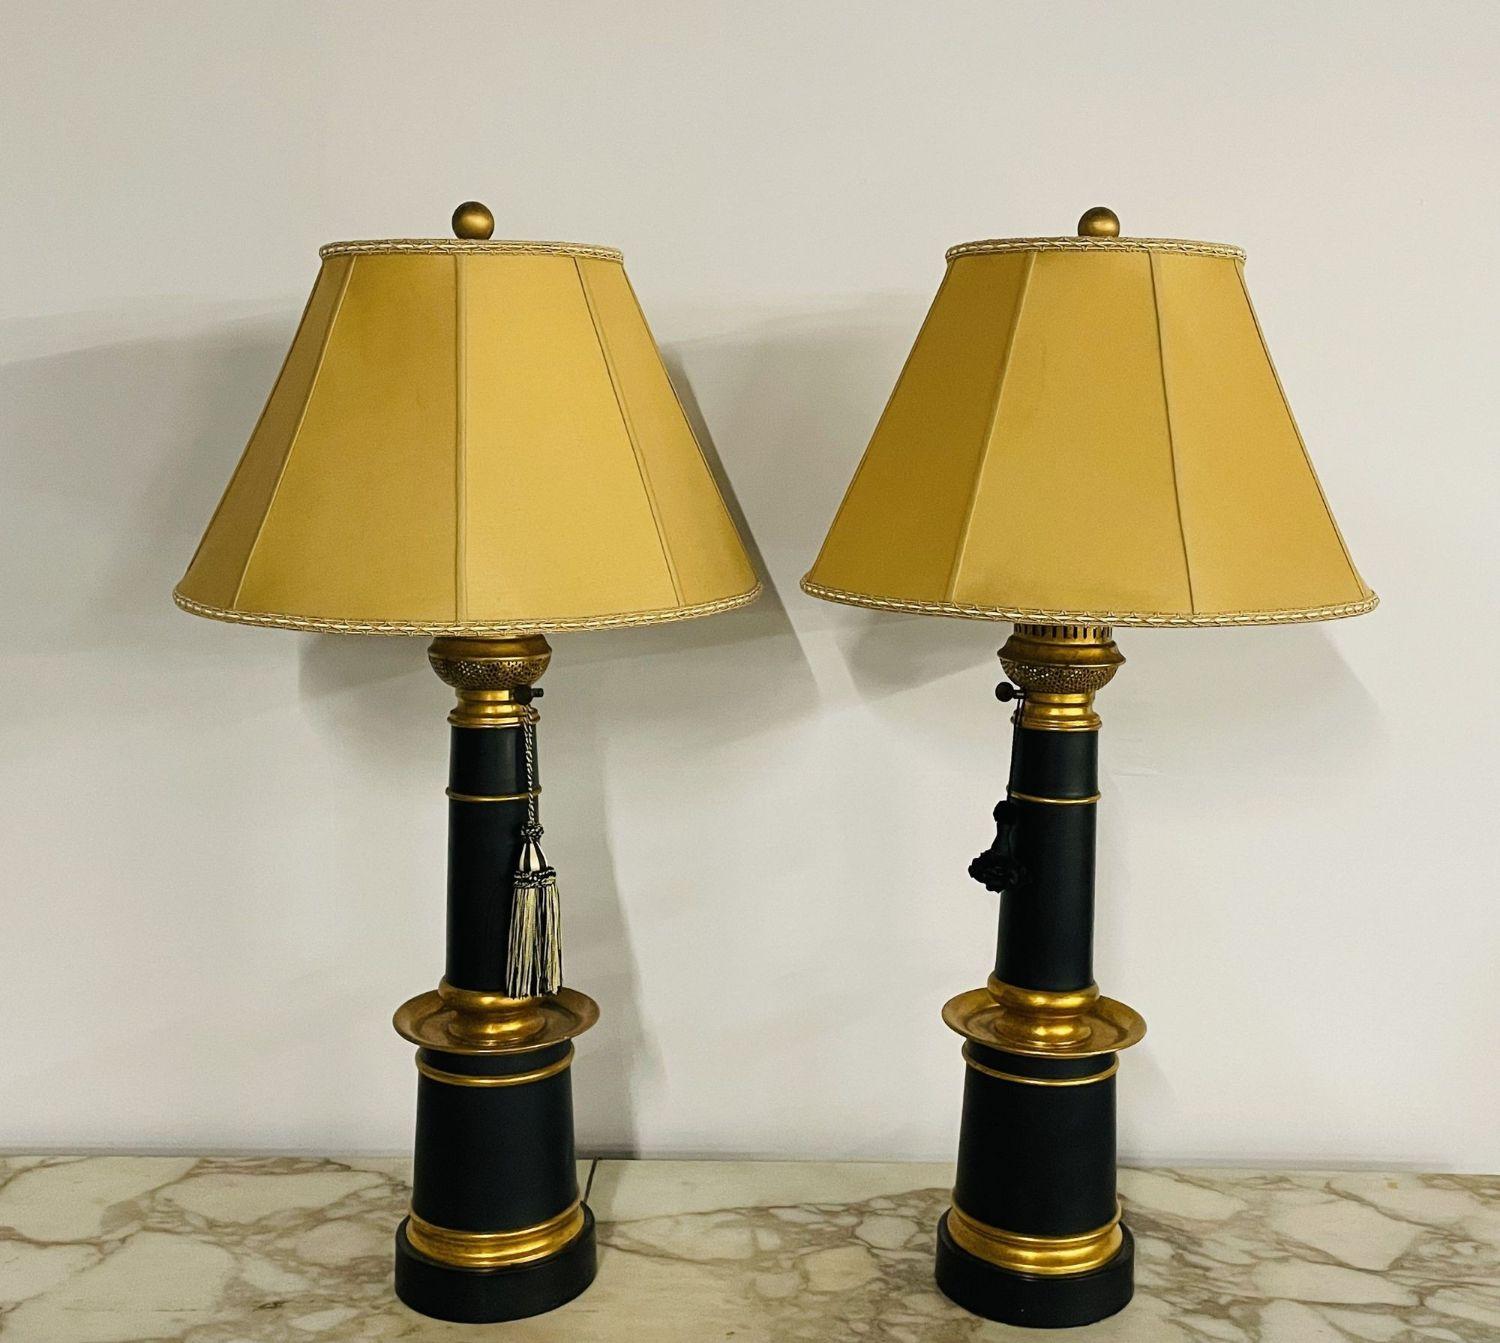 Pair of Hollywood Regency Style Table Lamps with Custom Shades, Ebony and Gilt In Good Condition For Sale In Stamford, CT